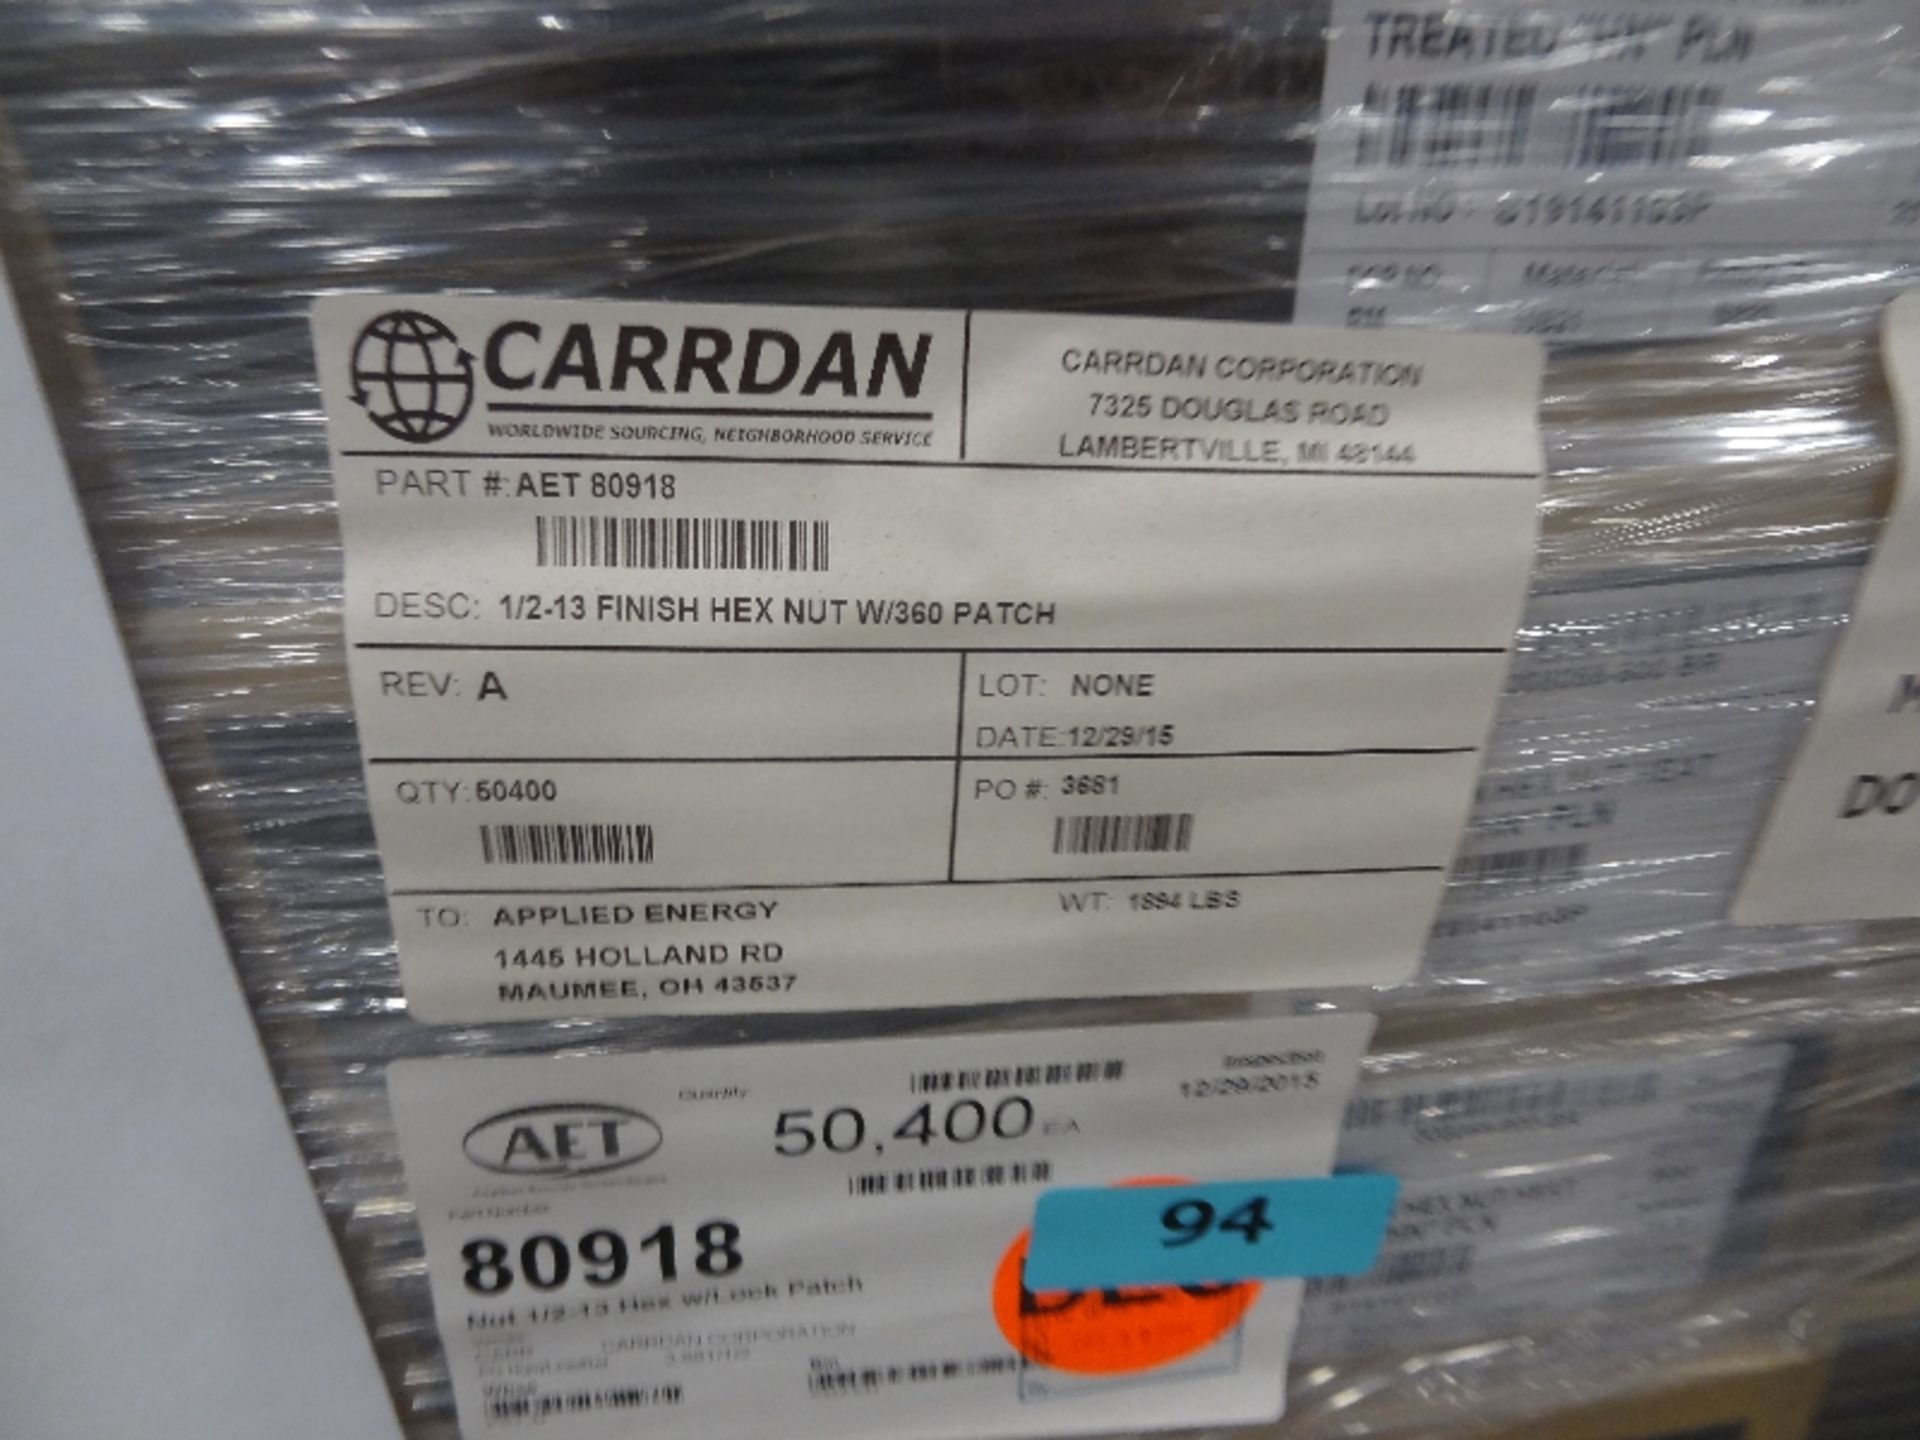 Pallet of New Boxes of 1/2''-13 Finish Hex Nut w/360 Patch (Approximately 1,894 lbs) - Image 2 of 2